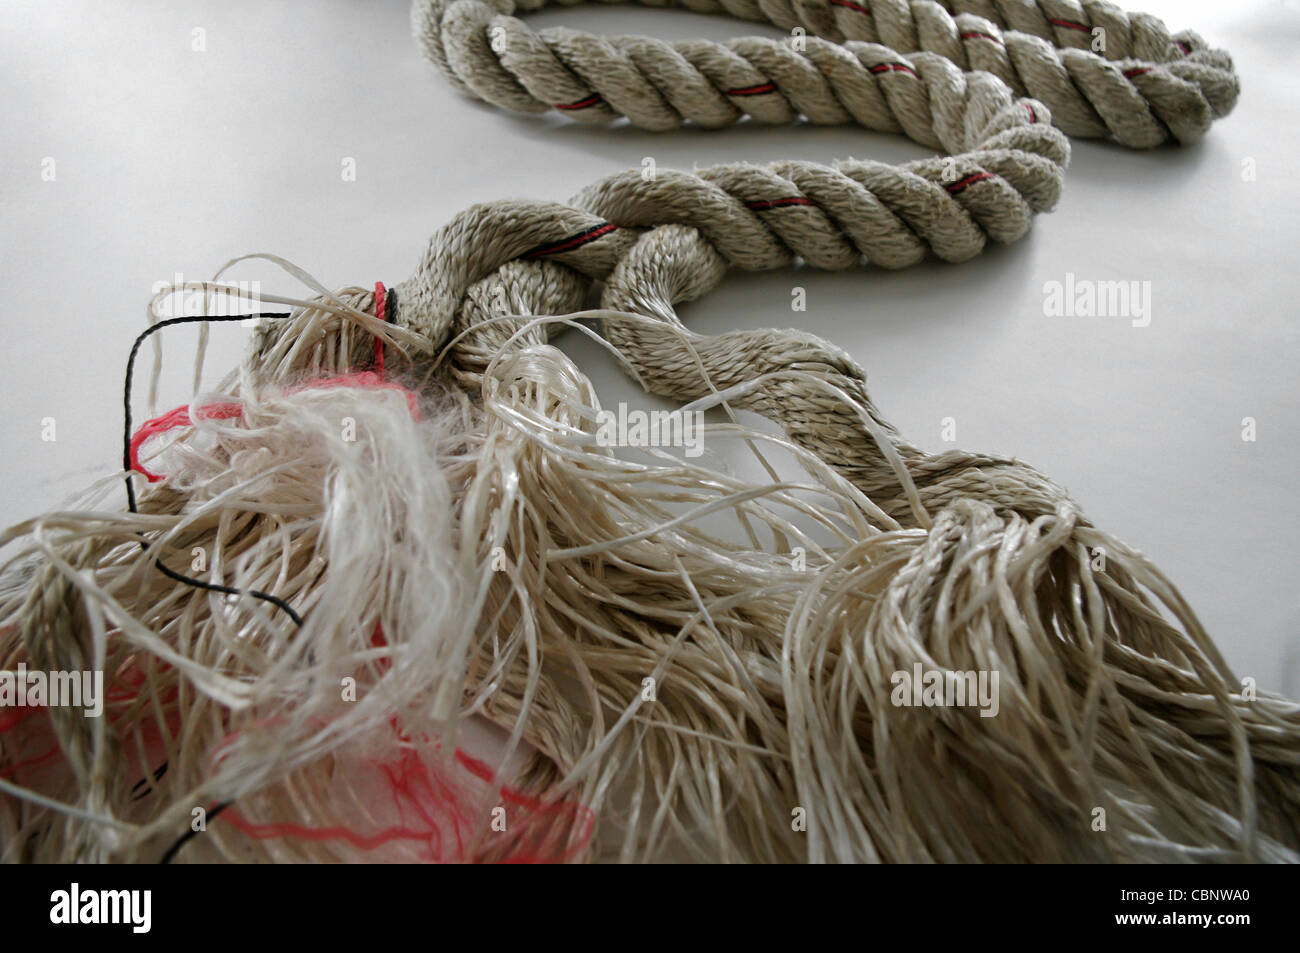 Neat twisted multi-ply rope coming apart into a disorganized tangle of loose ends Stock Photo